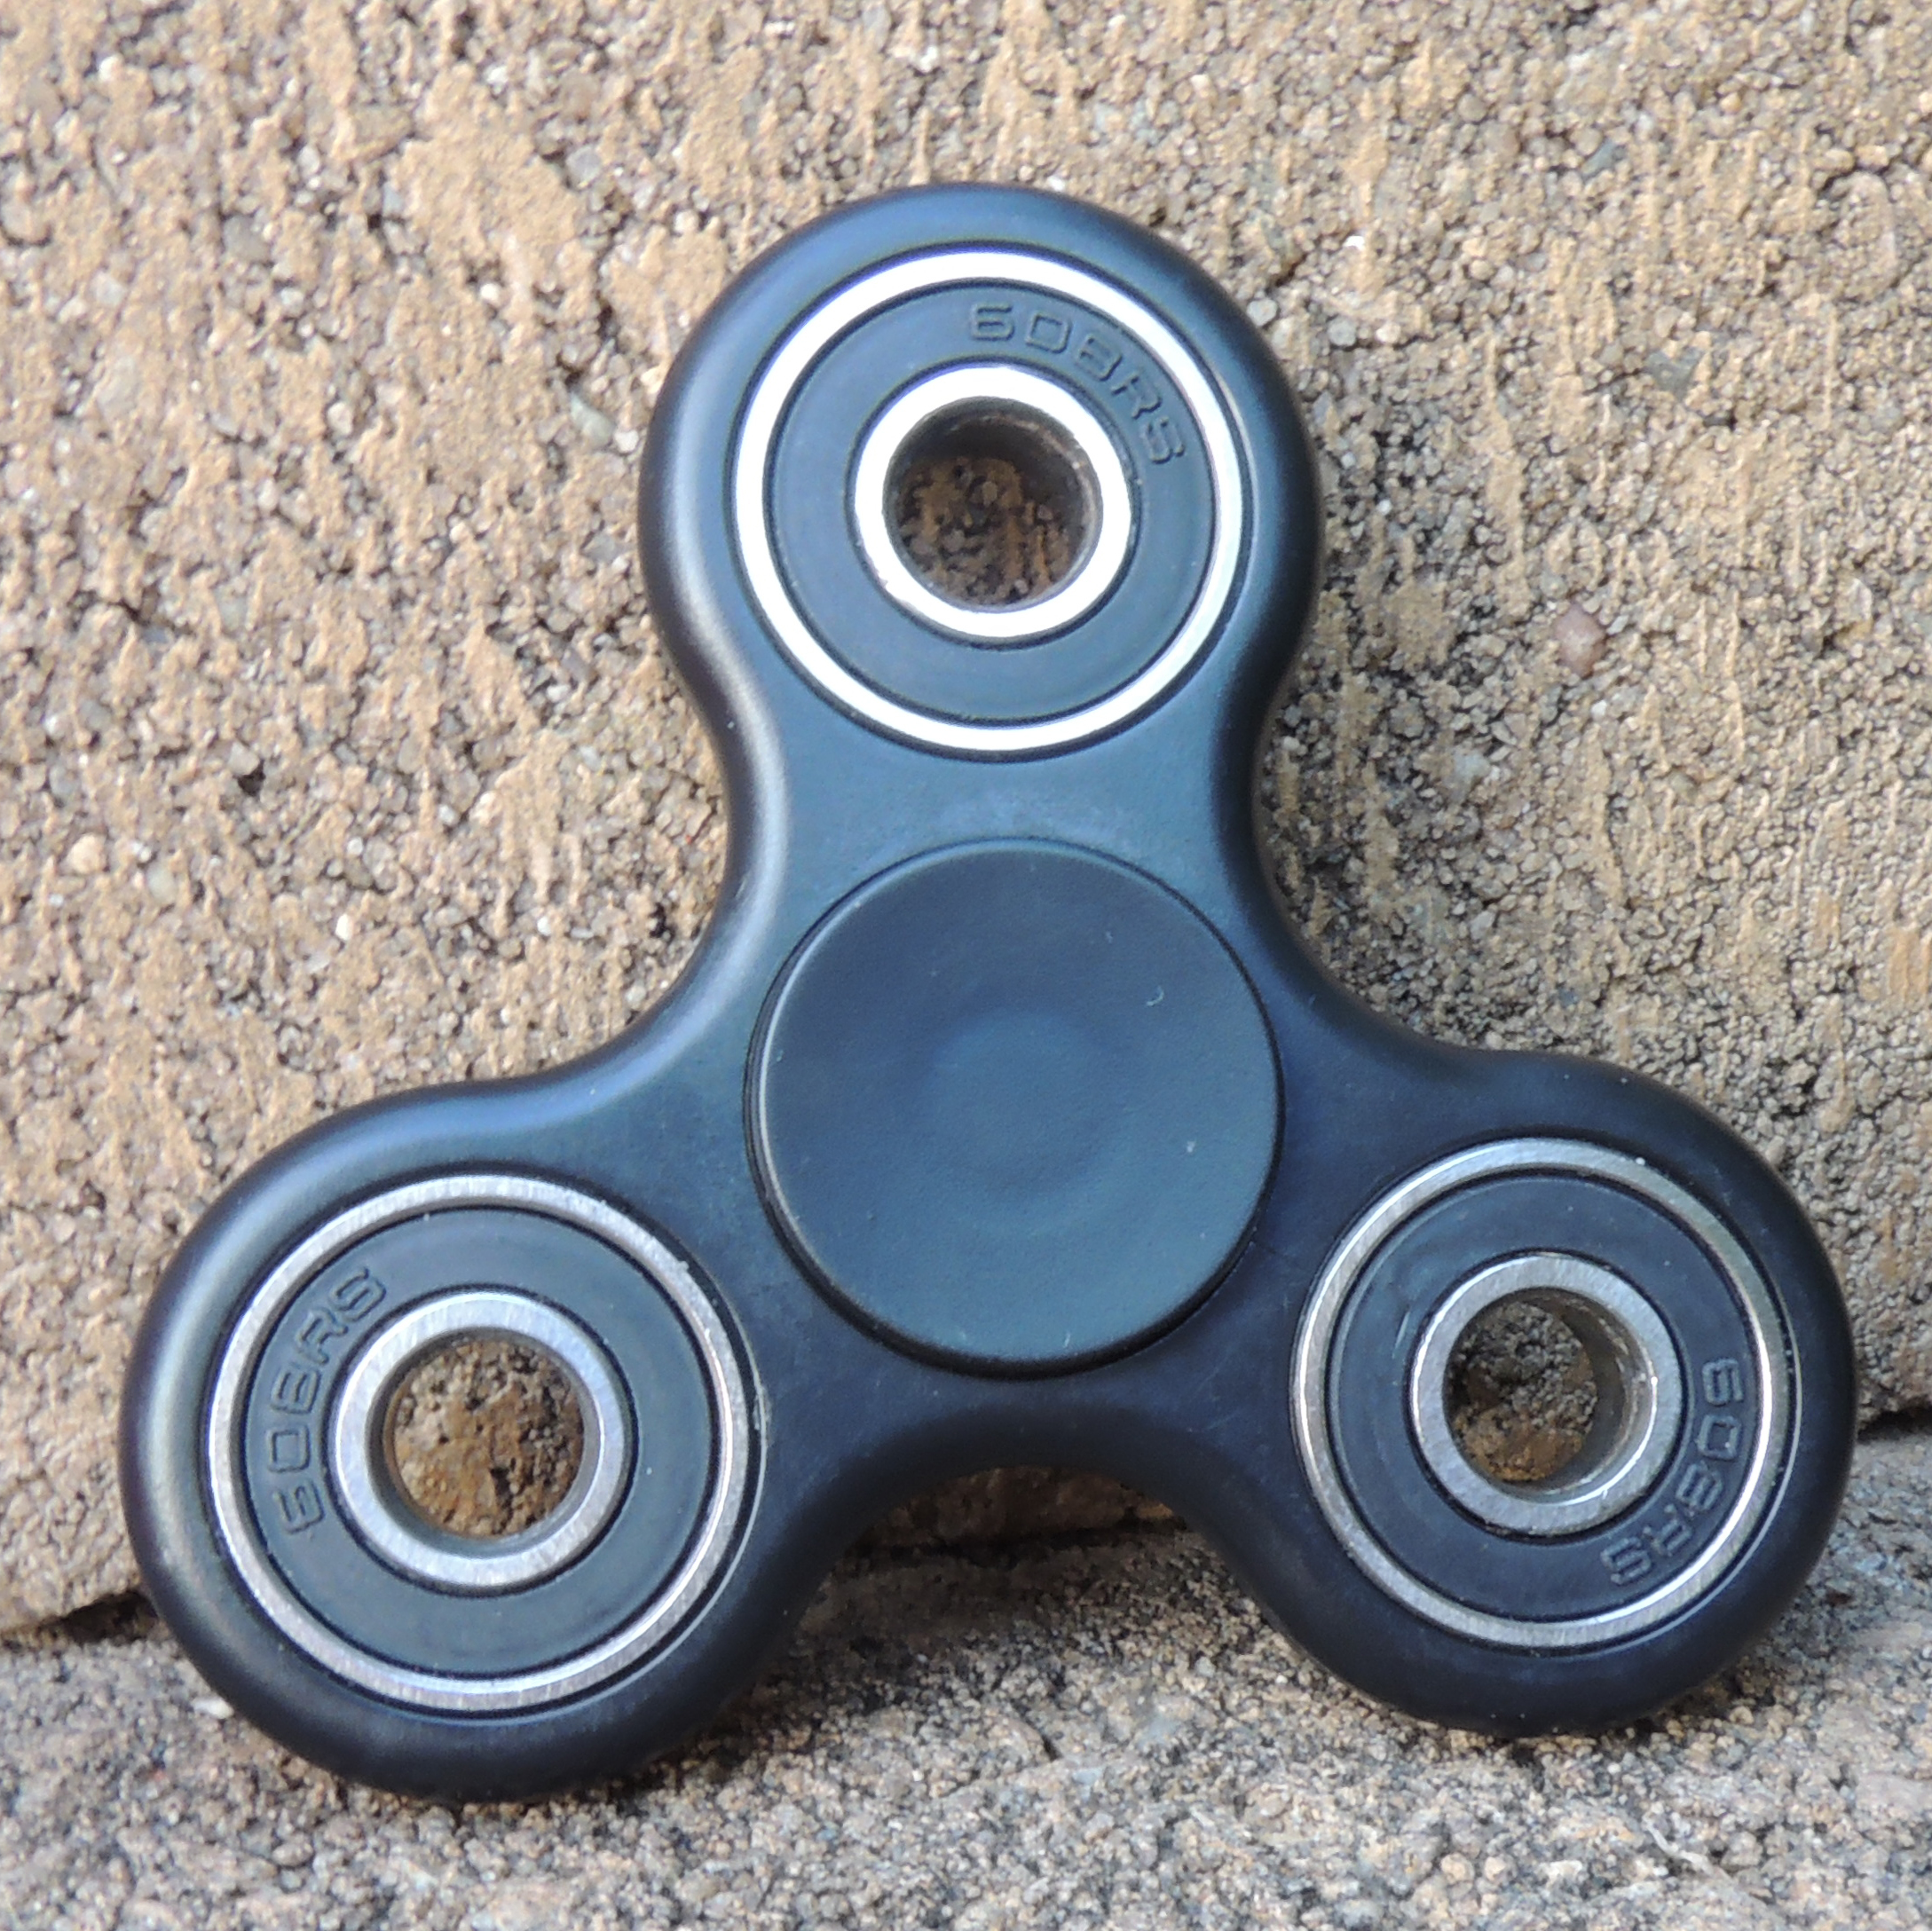 fidget spinner for anxiety